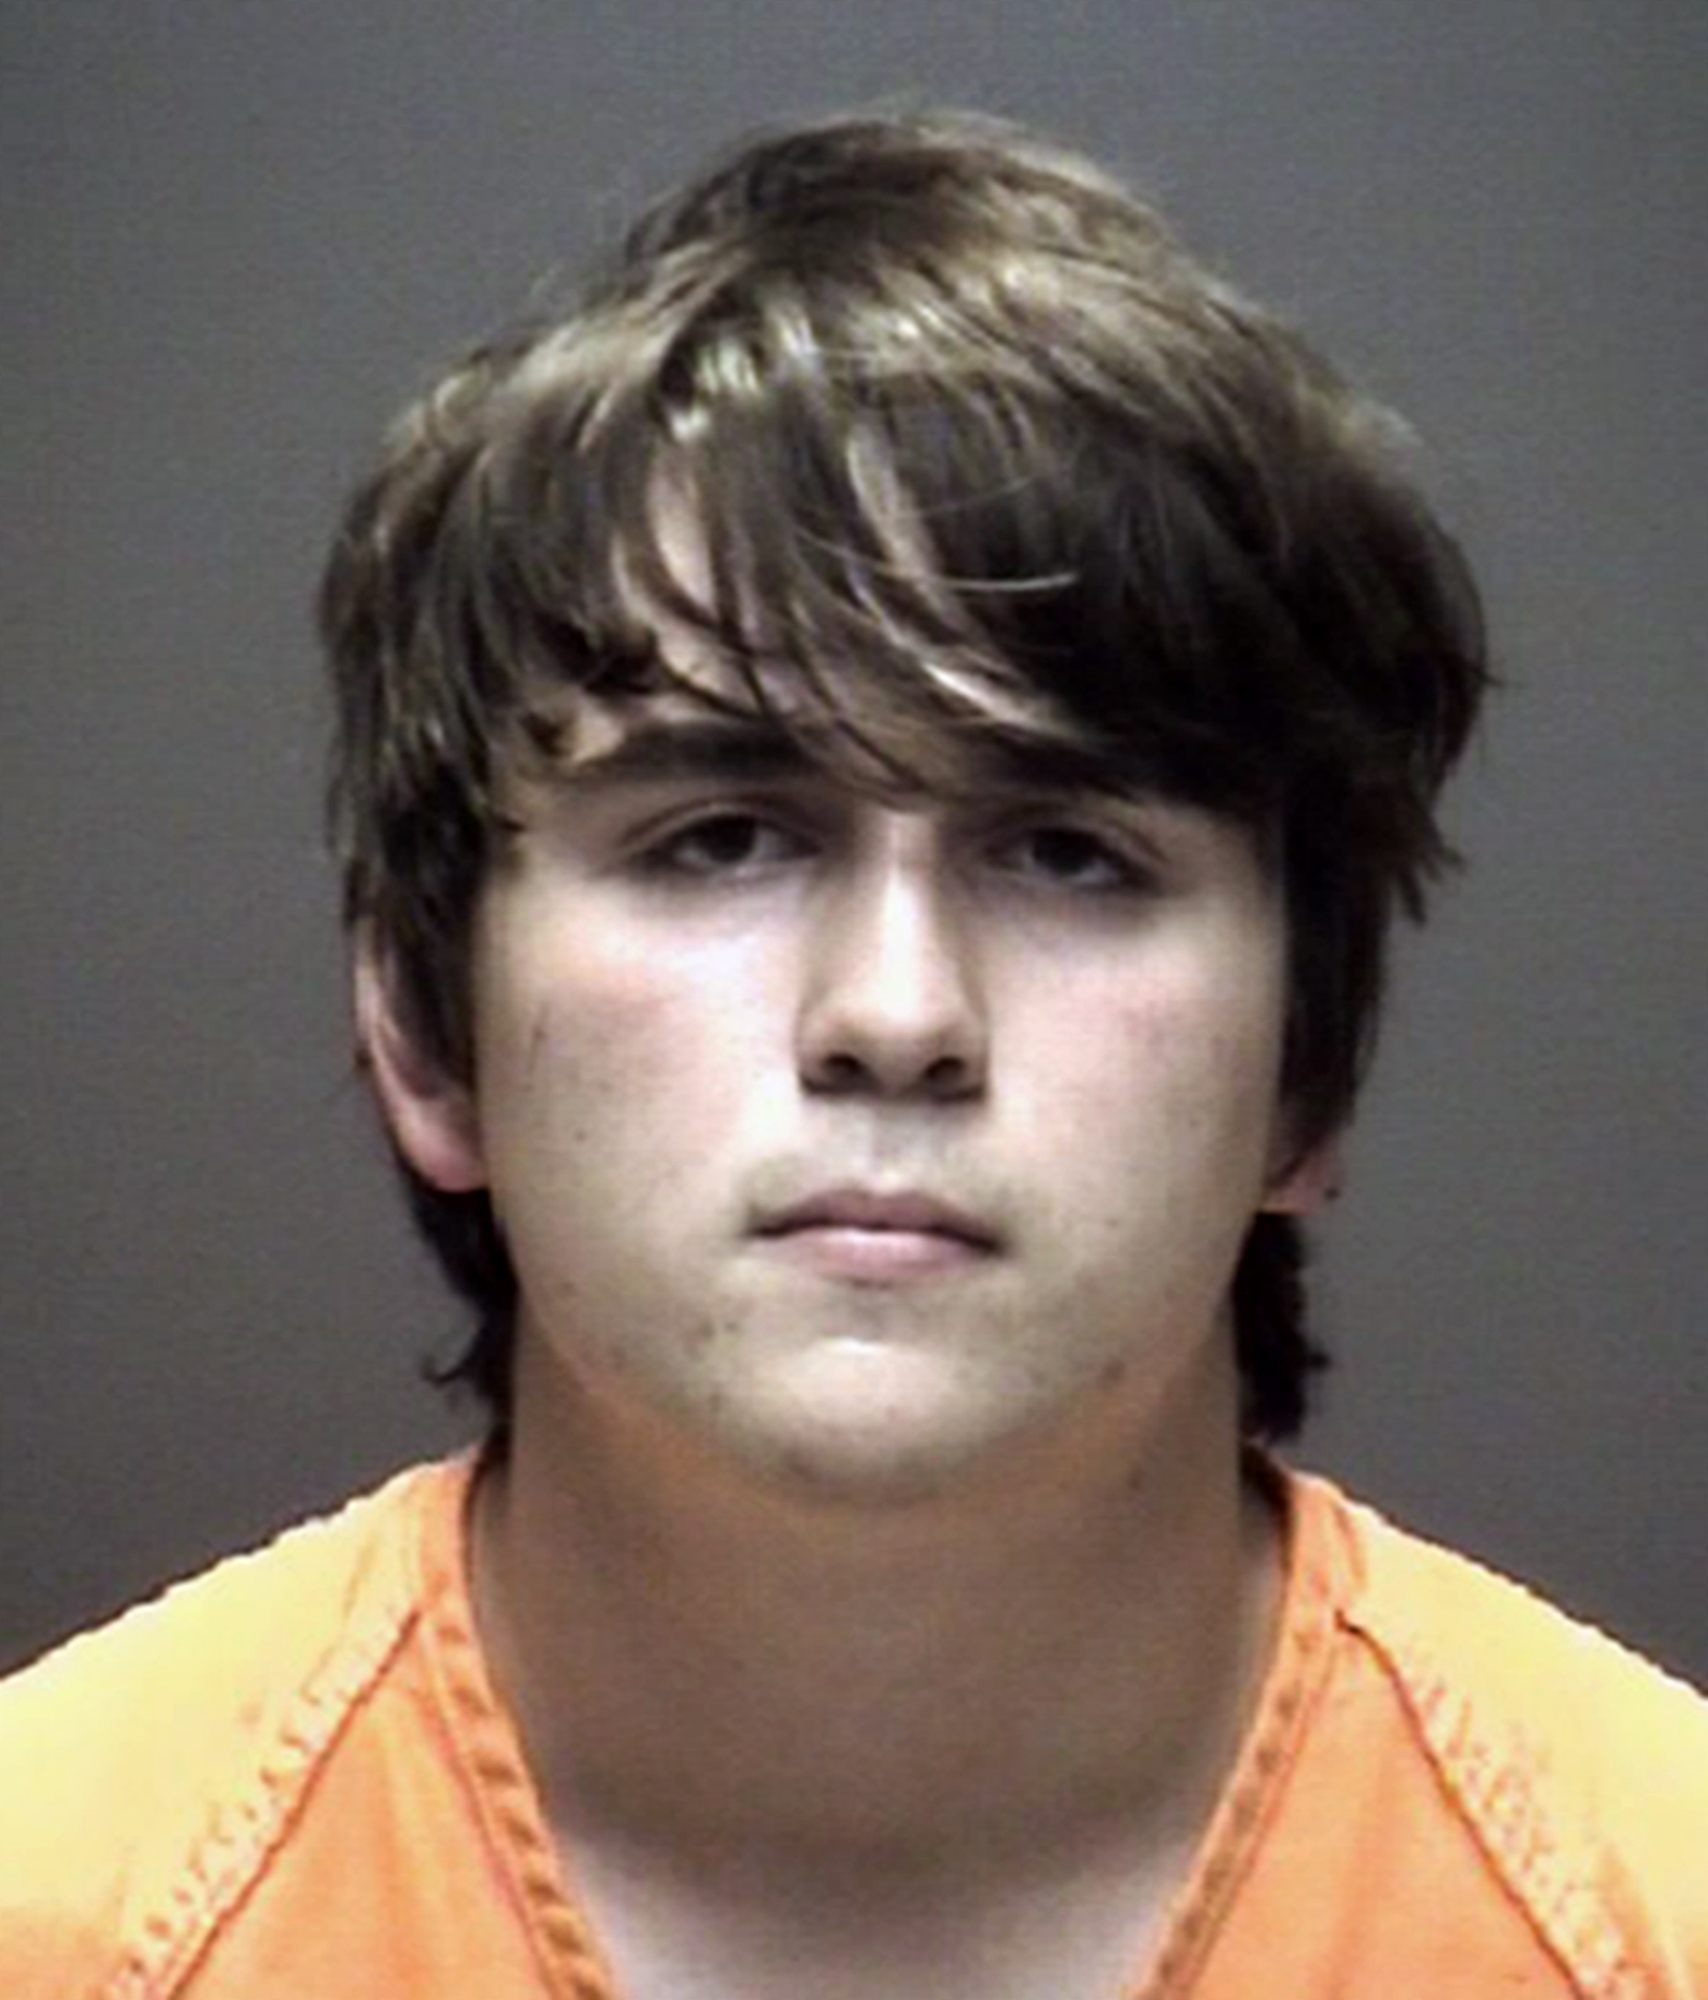 Texas School Shooting Suspects Father Thinks He Was Bullied The Daily Universe 